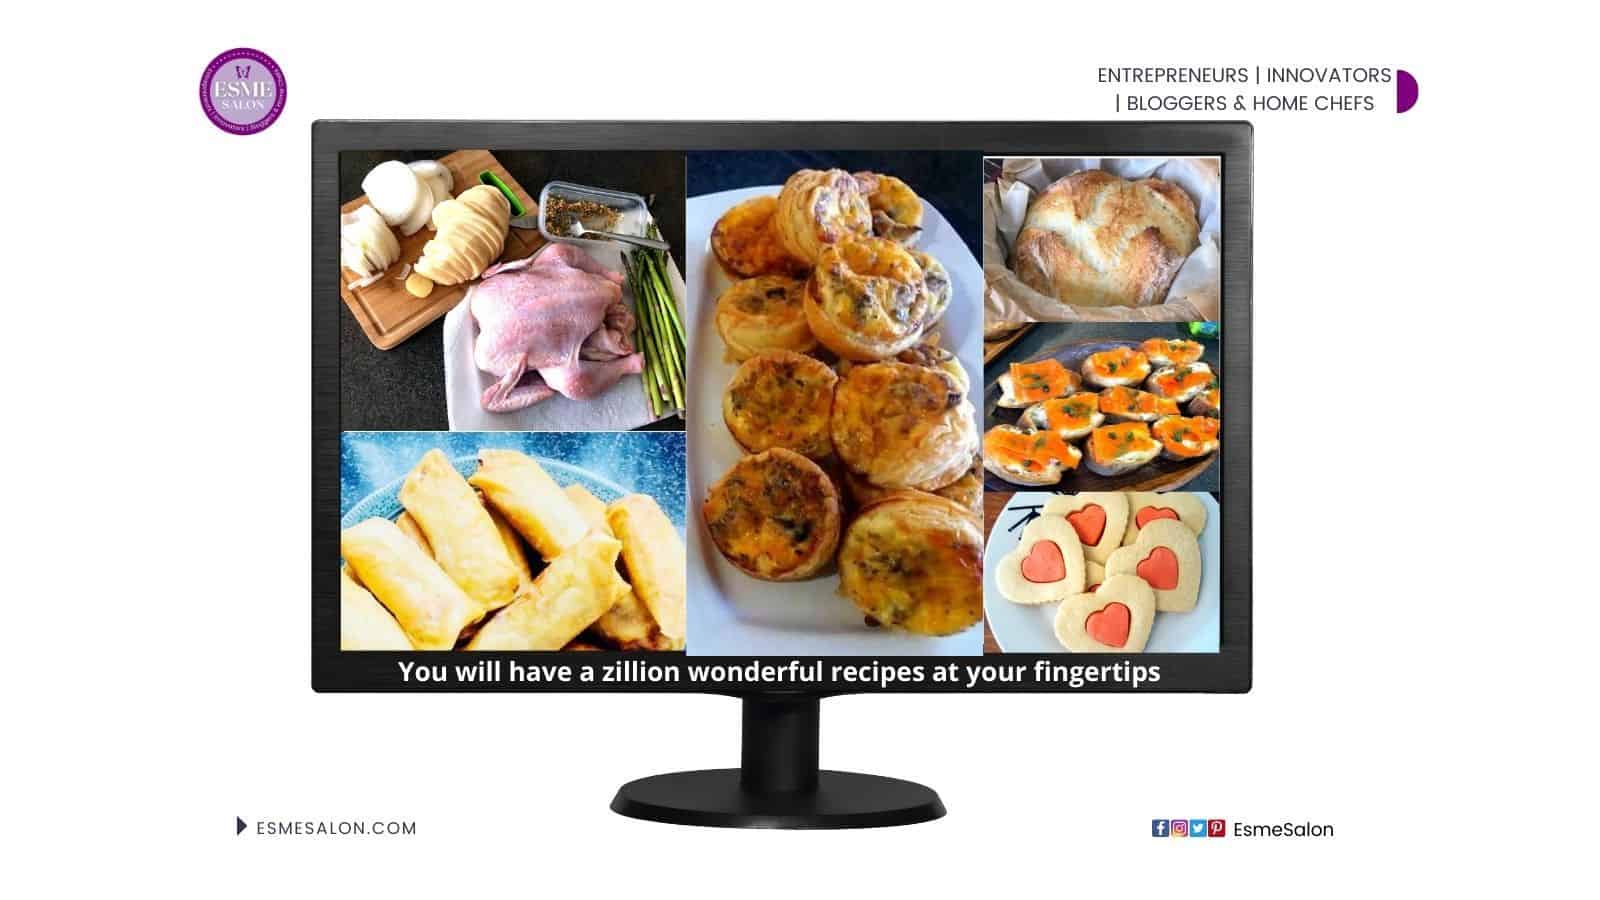 An image of a computer screen with various food pictures, fresh chicken, pastires, heart cookies and vegan lox